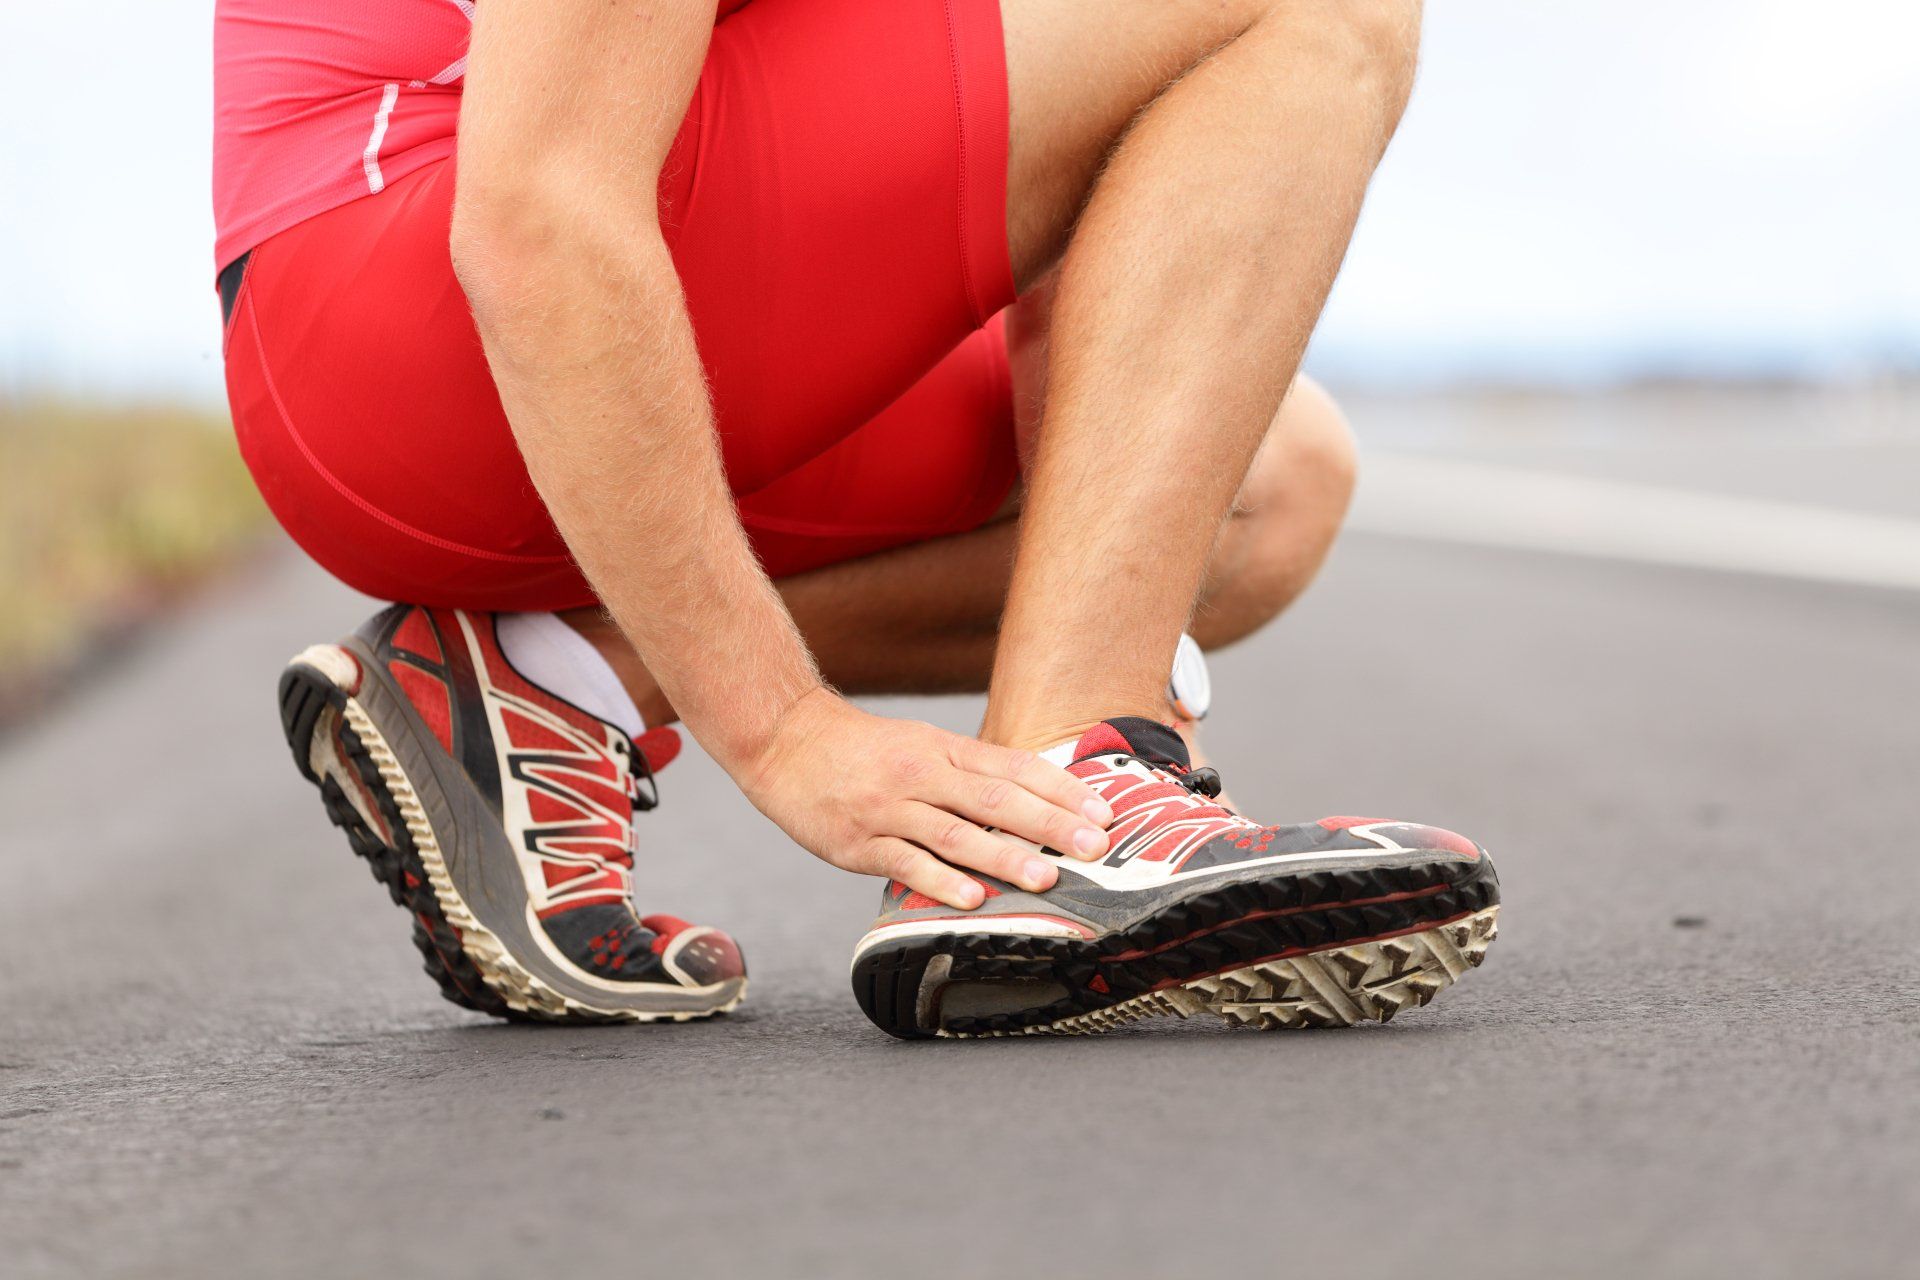 Runner with midfoot pain